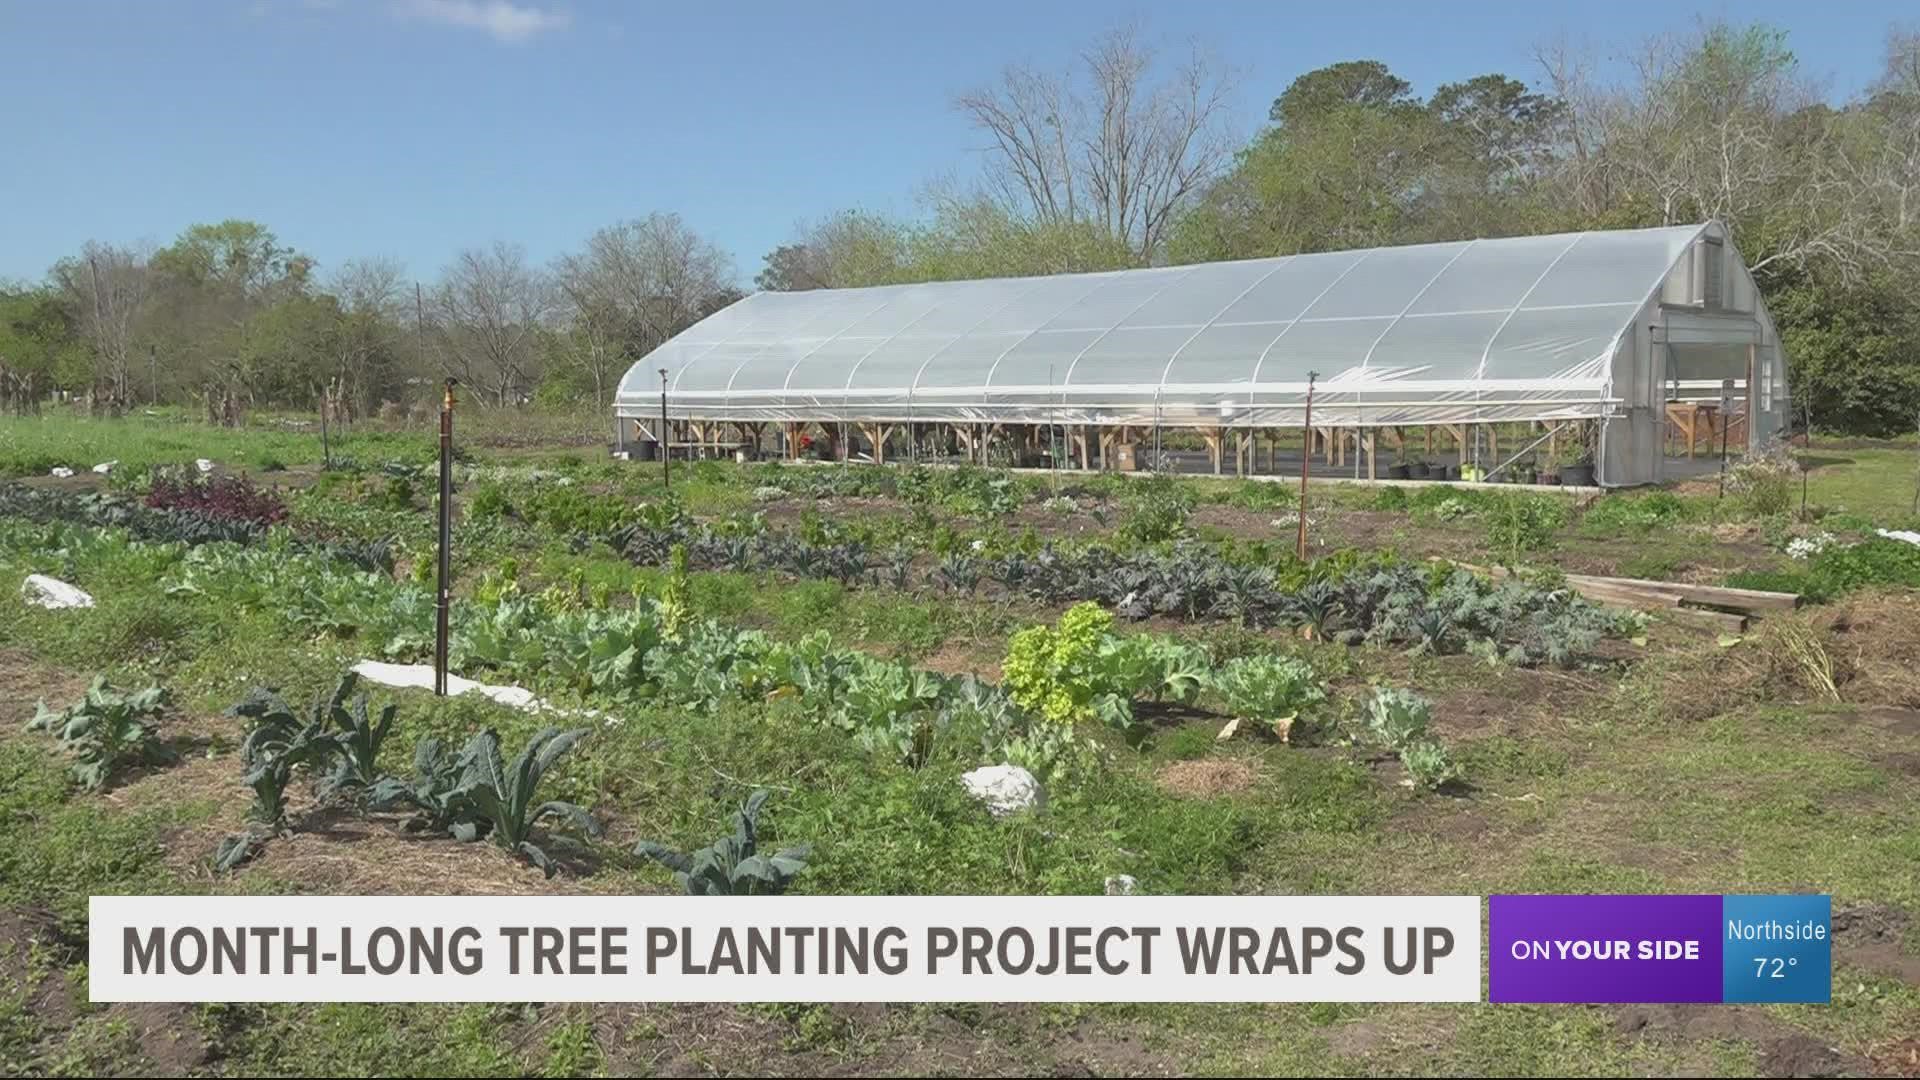 The project spanned four weekends and wrapped up this Saturday. It was made possible through a partnership with Eat Your Yard Jax and White Harvest Farms.